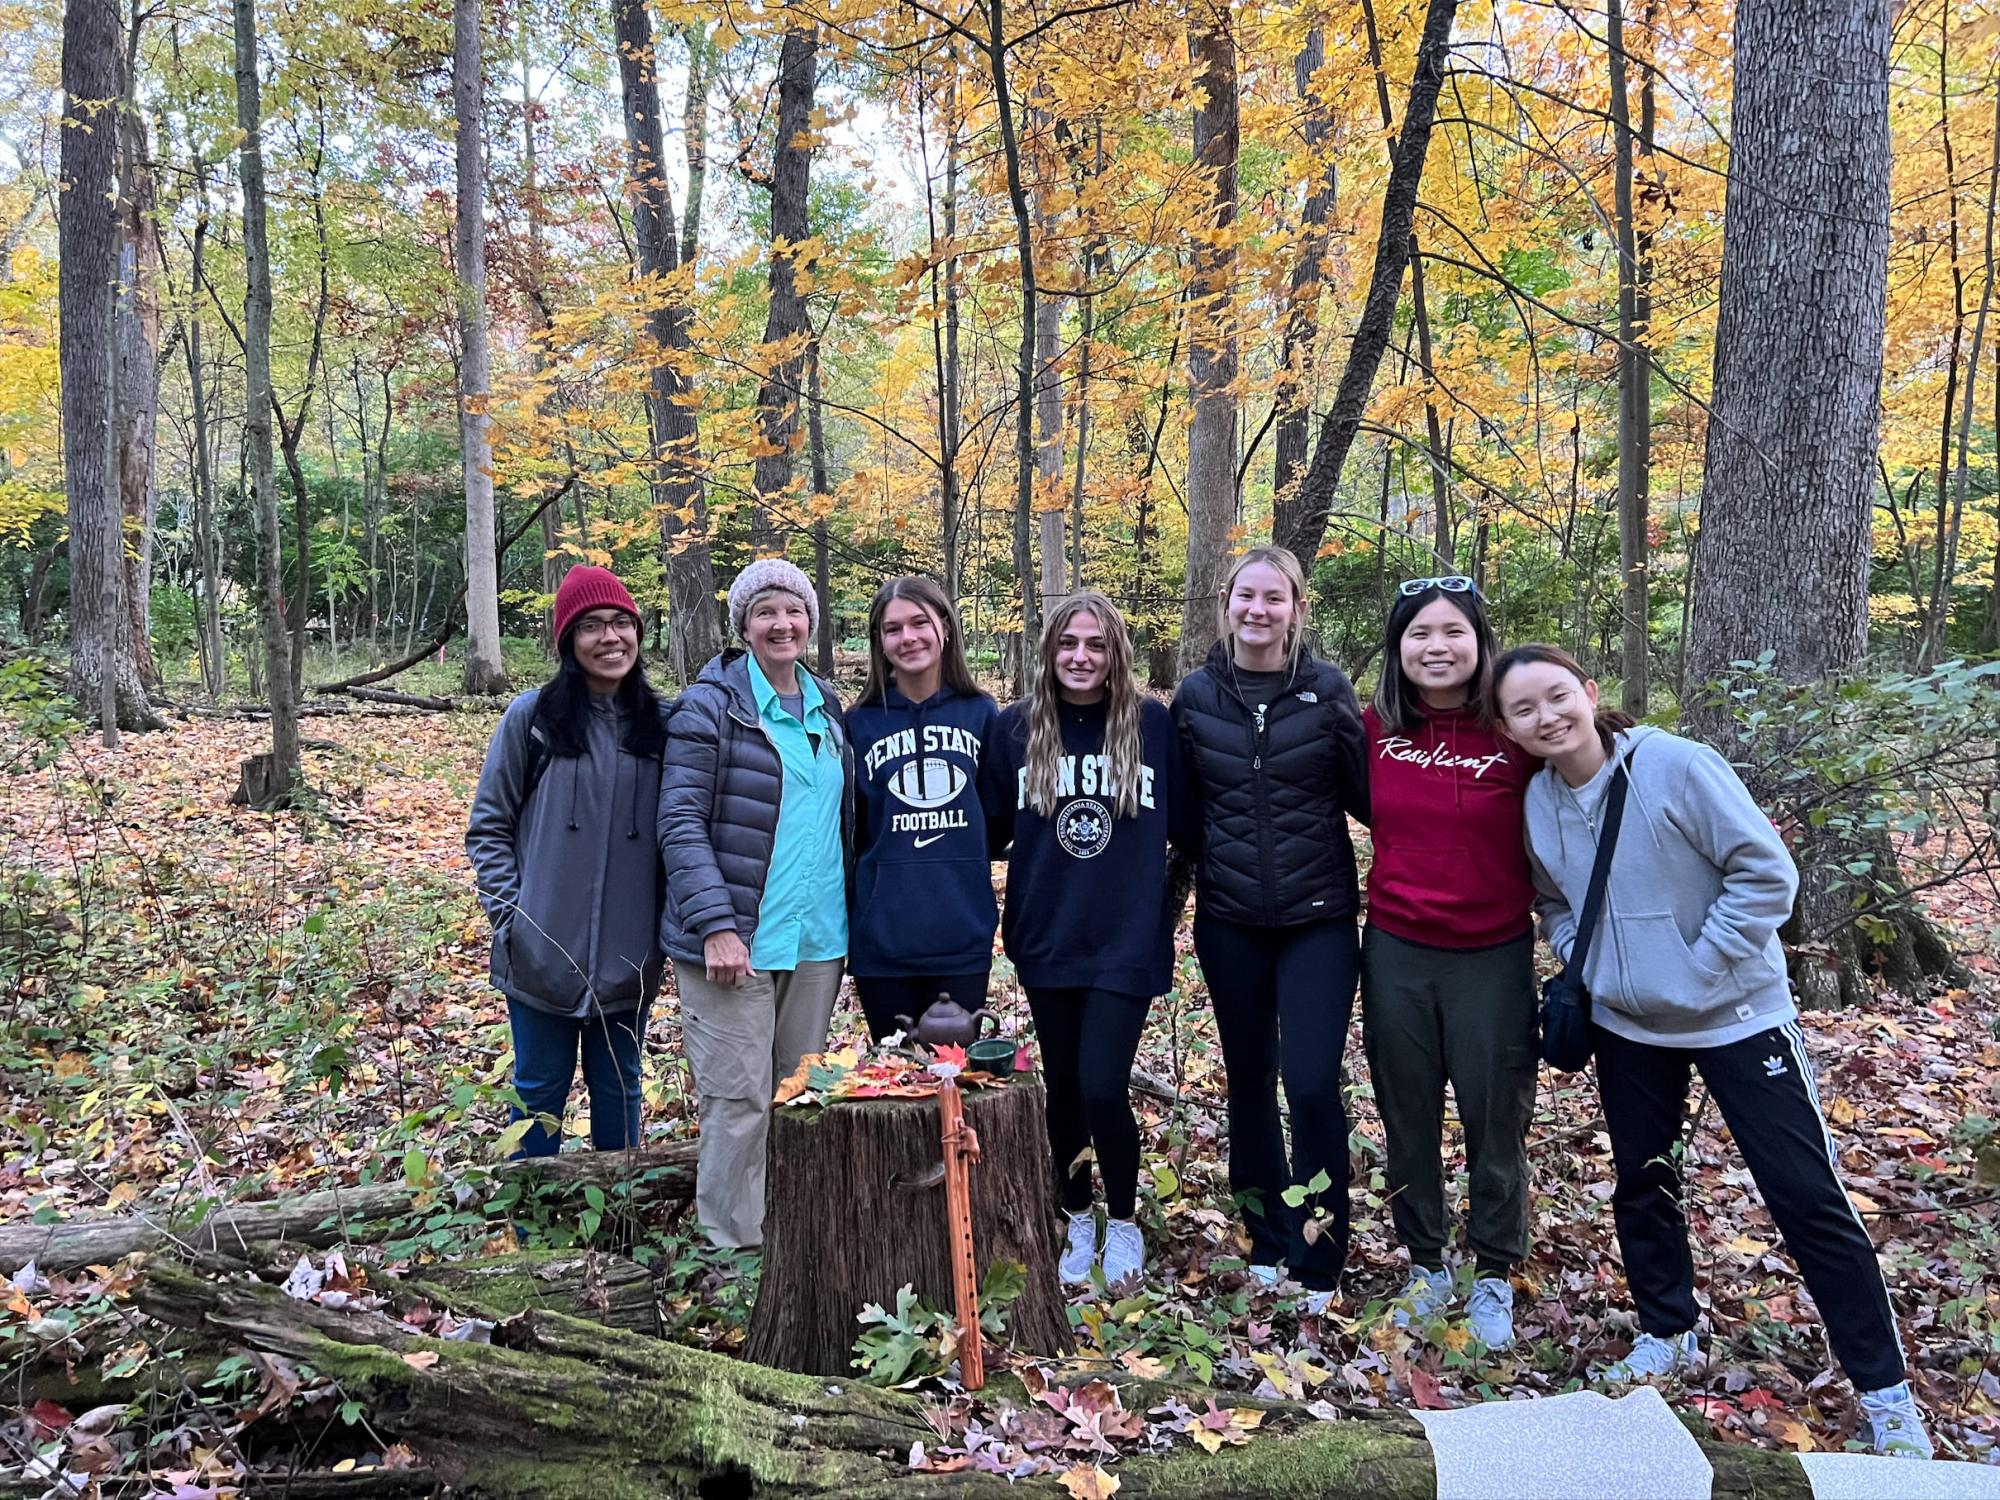 Penn State students on a "forest bath" in the woods